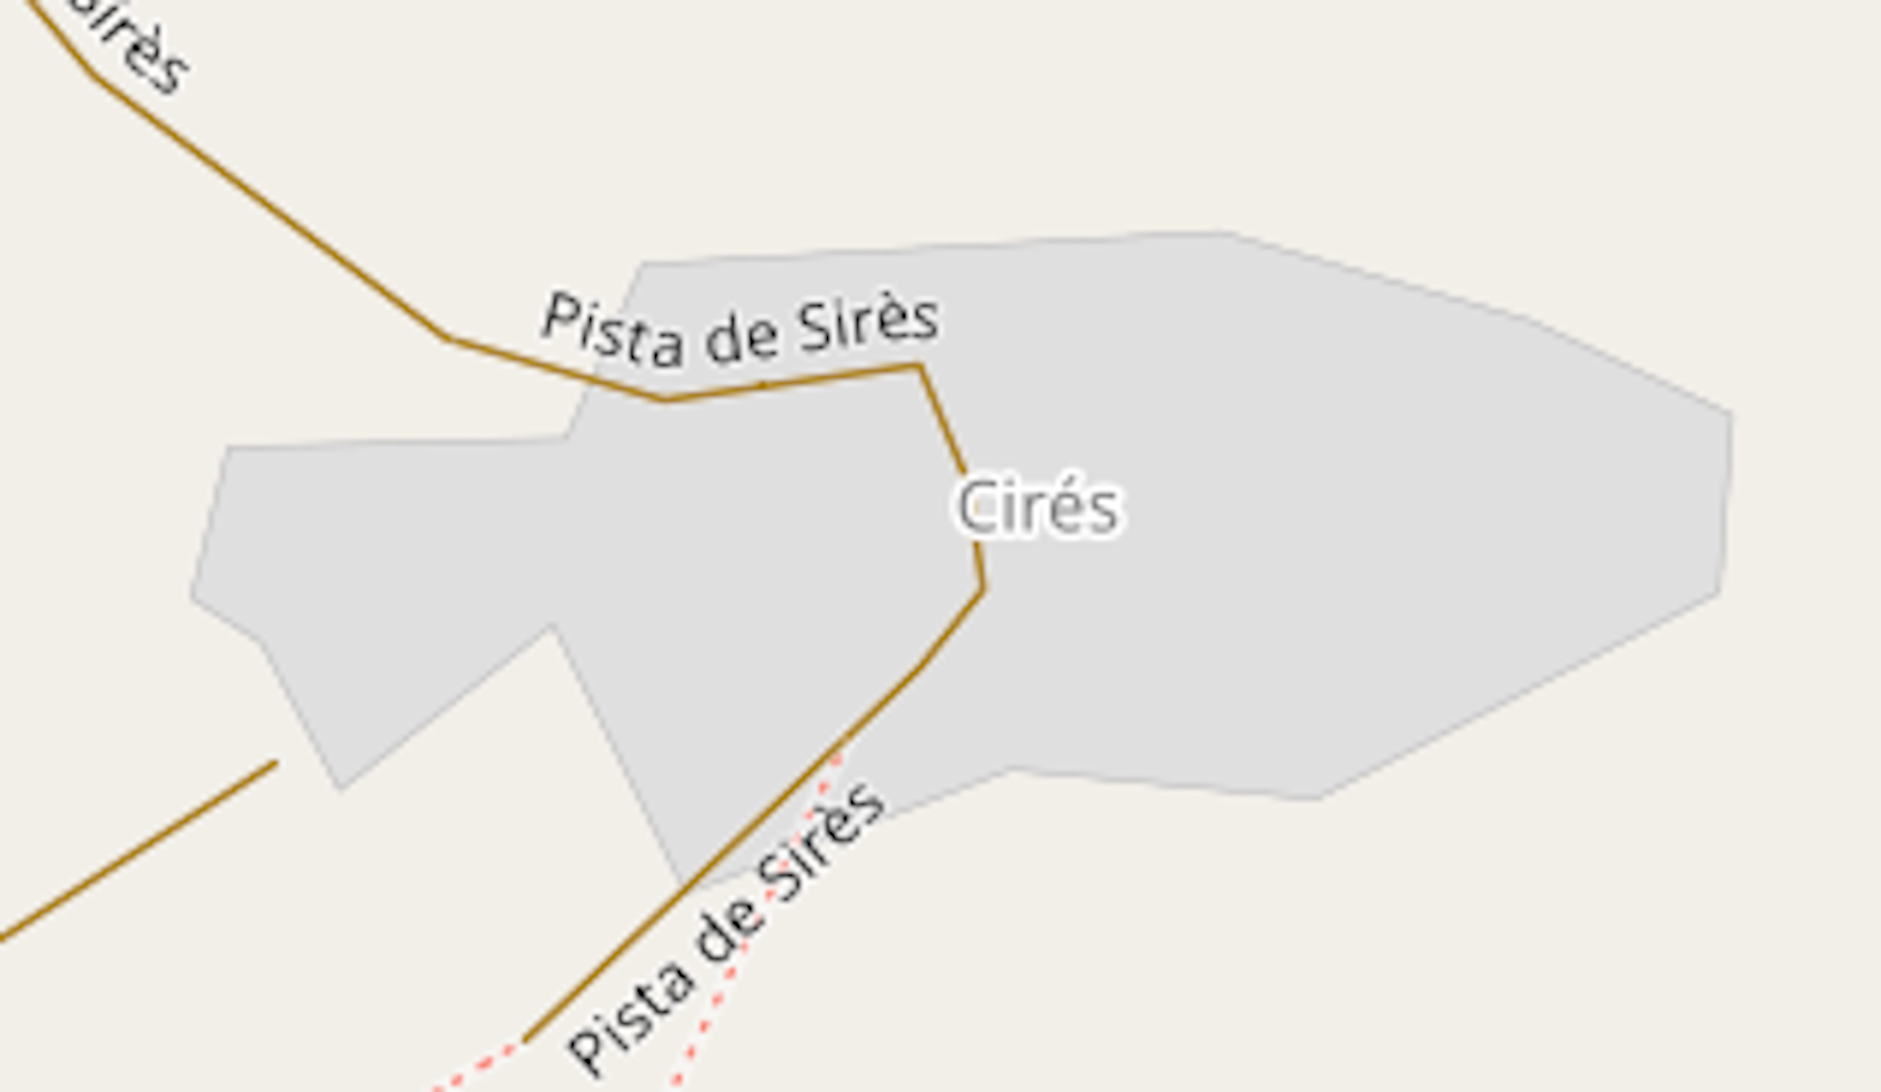 OSM in the town of Cirés